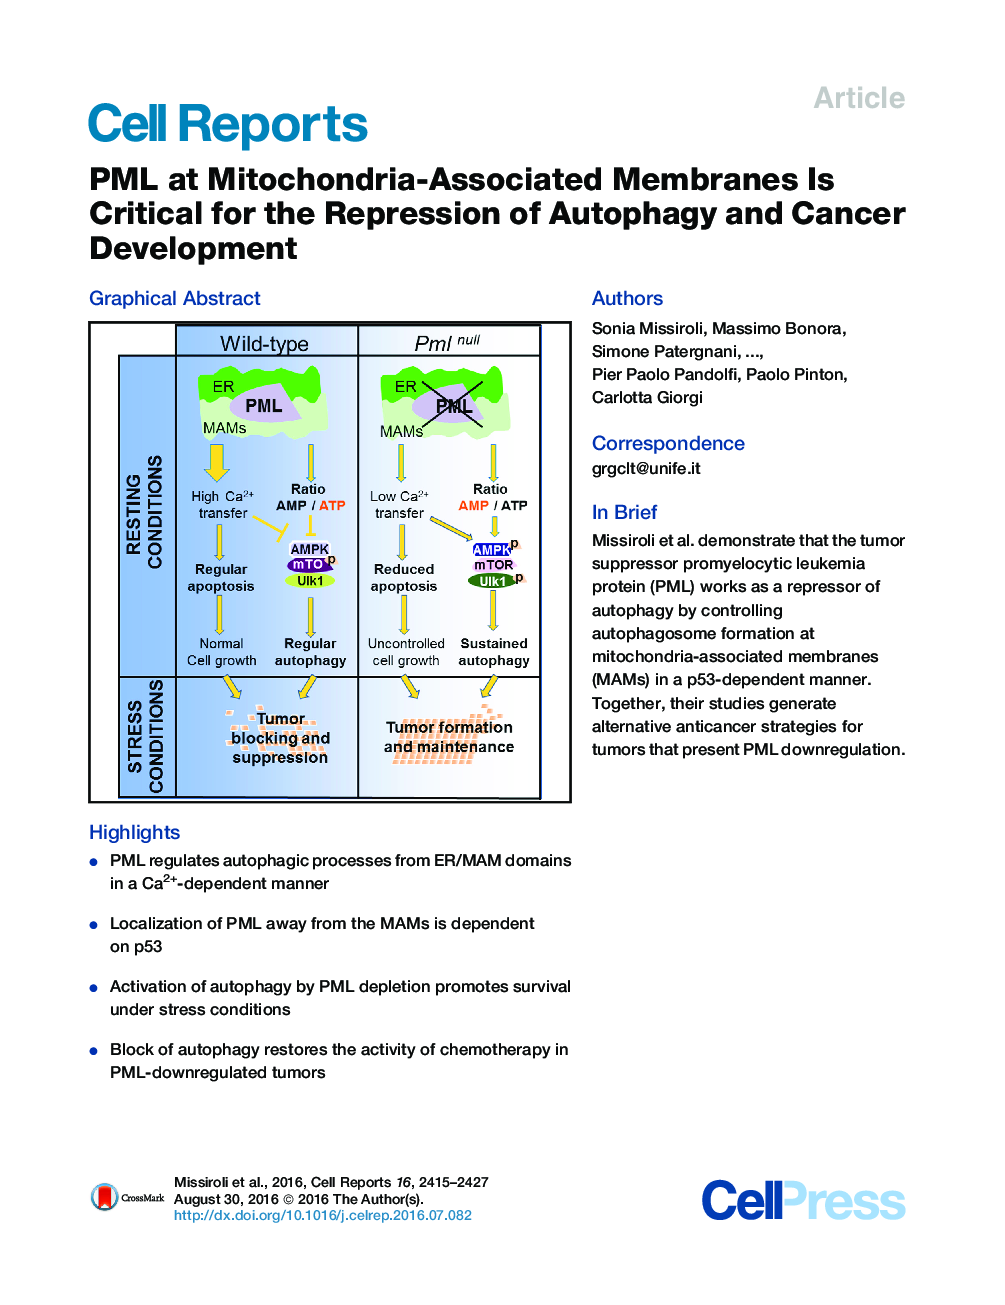 PML at Mitochondria-Associated Membranes Is Critical for the Repression of Autophagy and Cancer Development